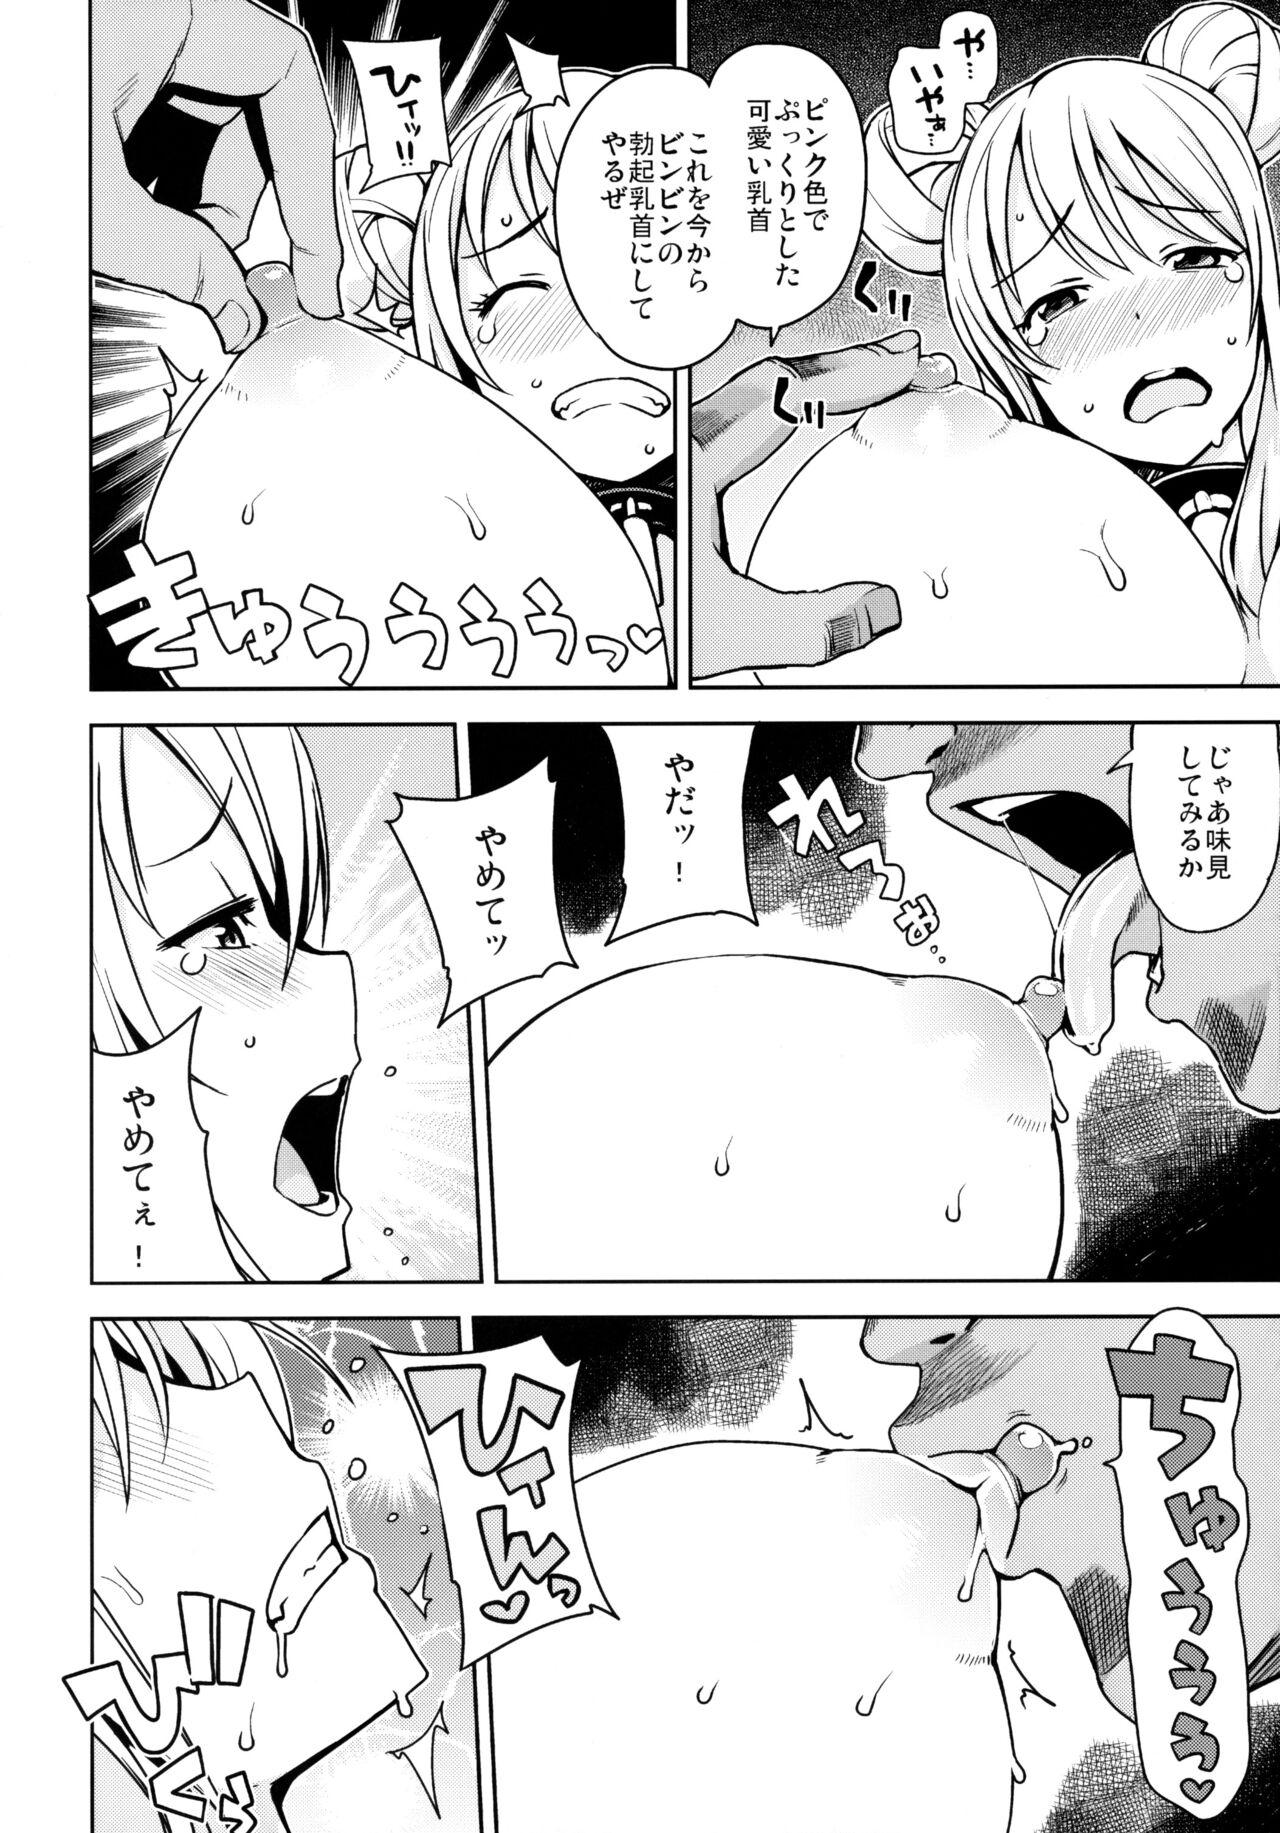 Handjobs Witch Bitch Collection Vol.1 - Fairy tail Hotel - Page 7